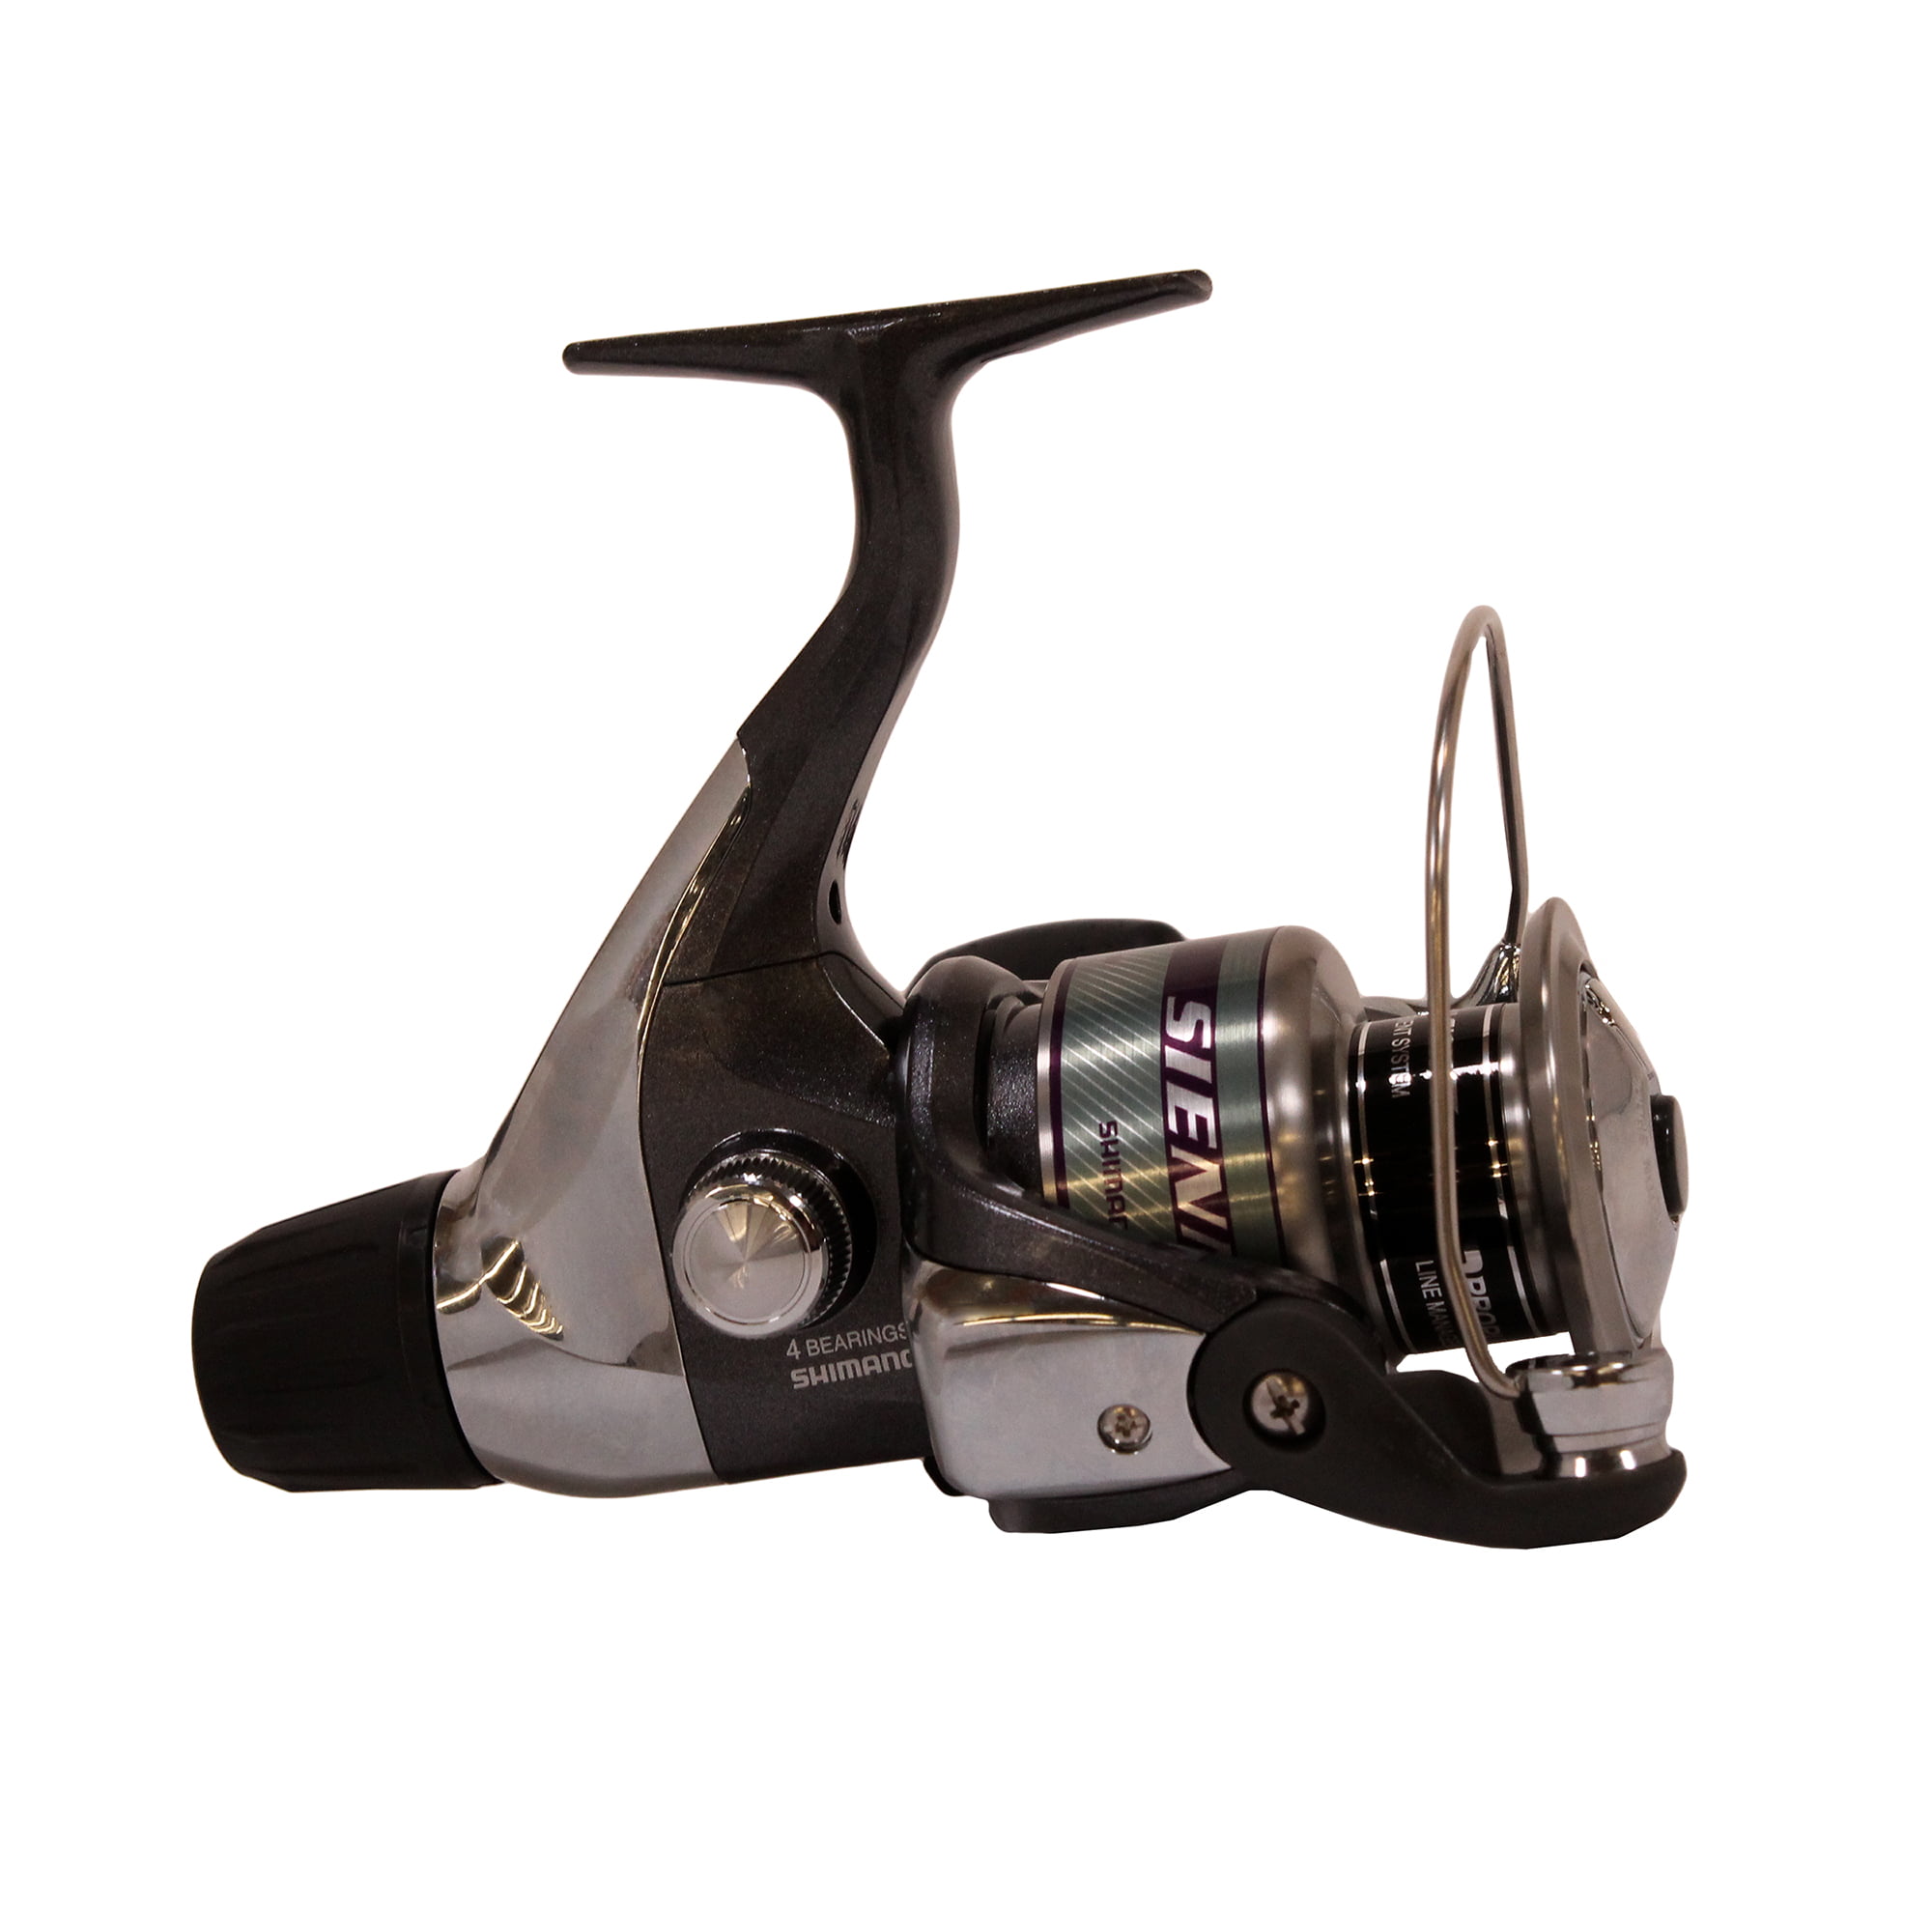 Shimano Sienna Spinning Reel 4000 Reel Size, 5.1:1 Gear Ratio, 32 Retrieve  Rate, Ambidextrous, Boxed